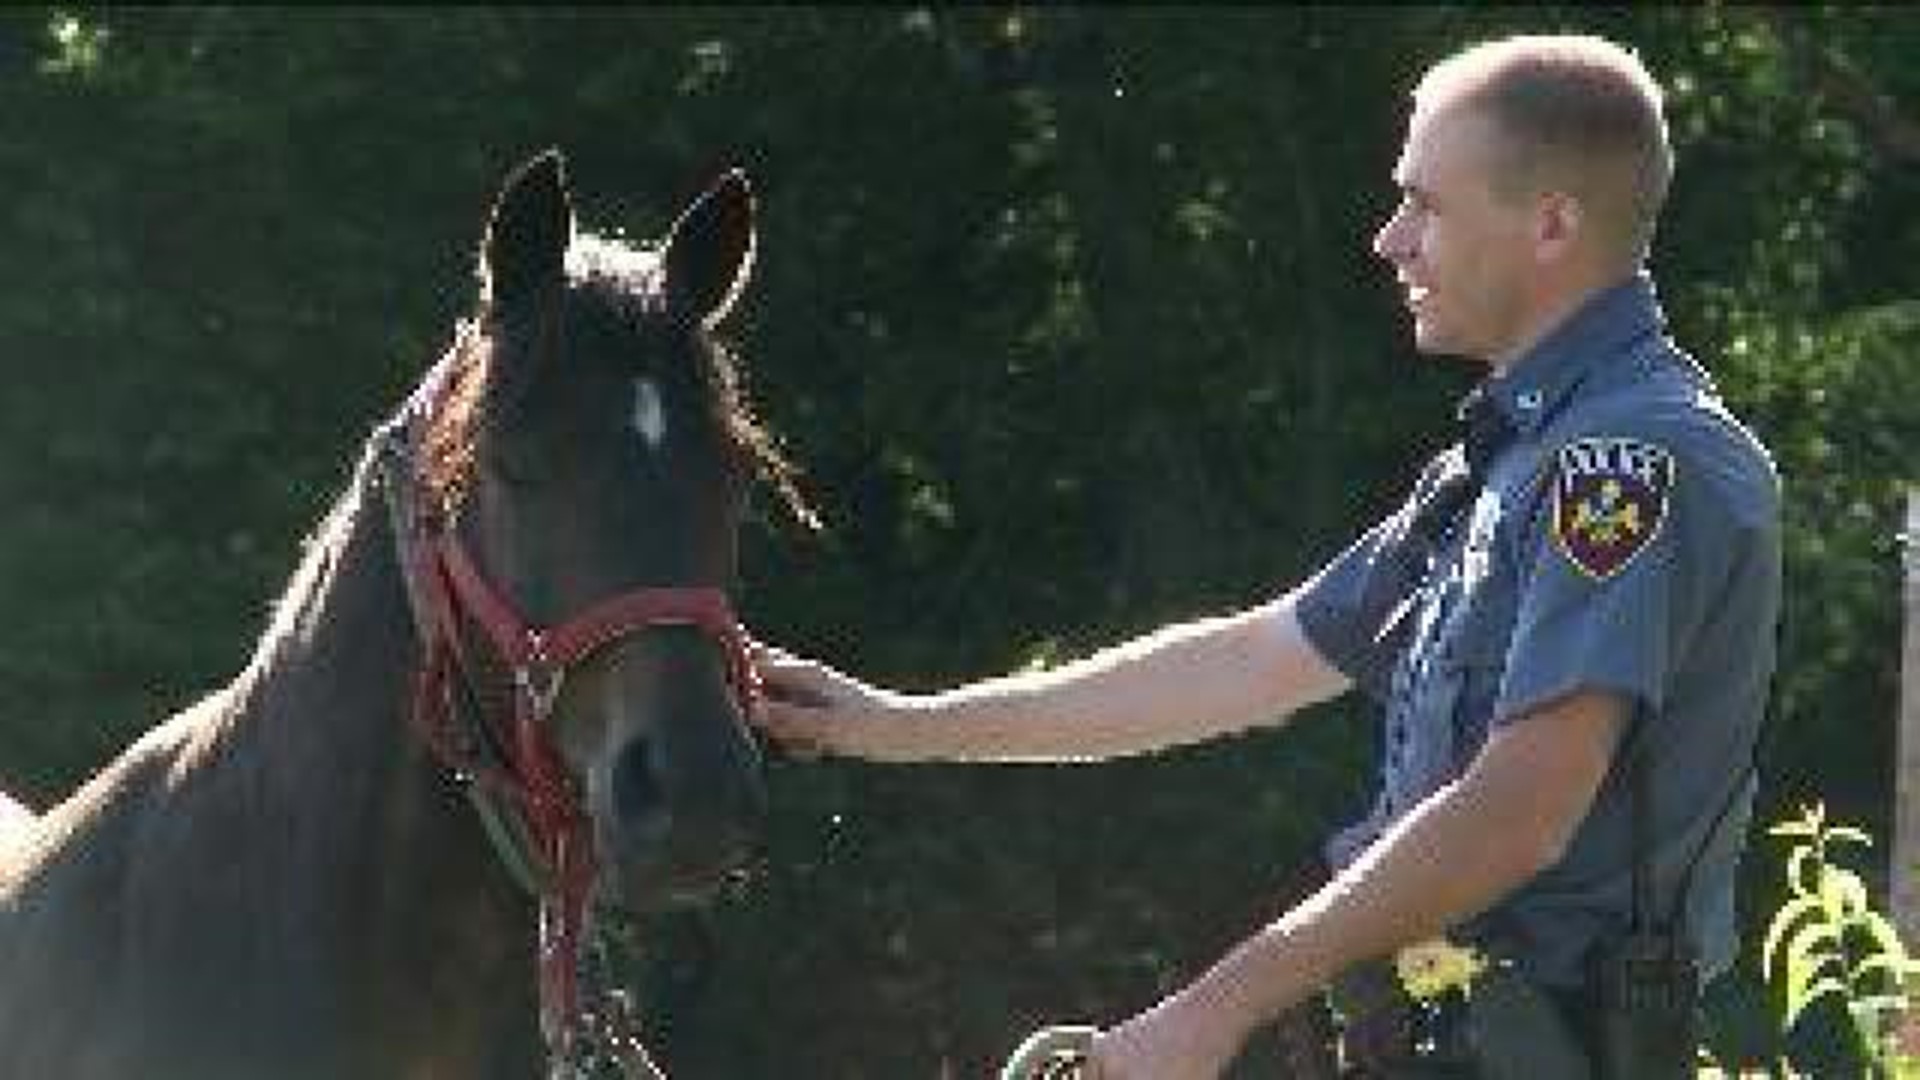 Cops Corral Horse in Old Forge